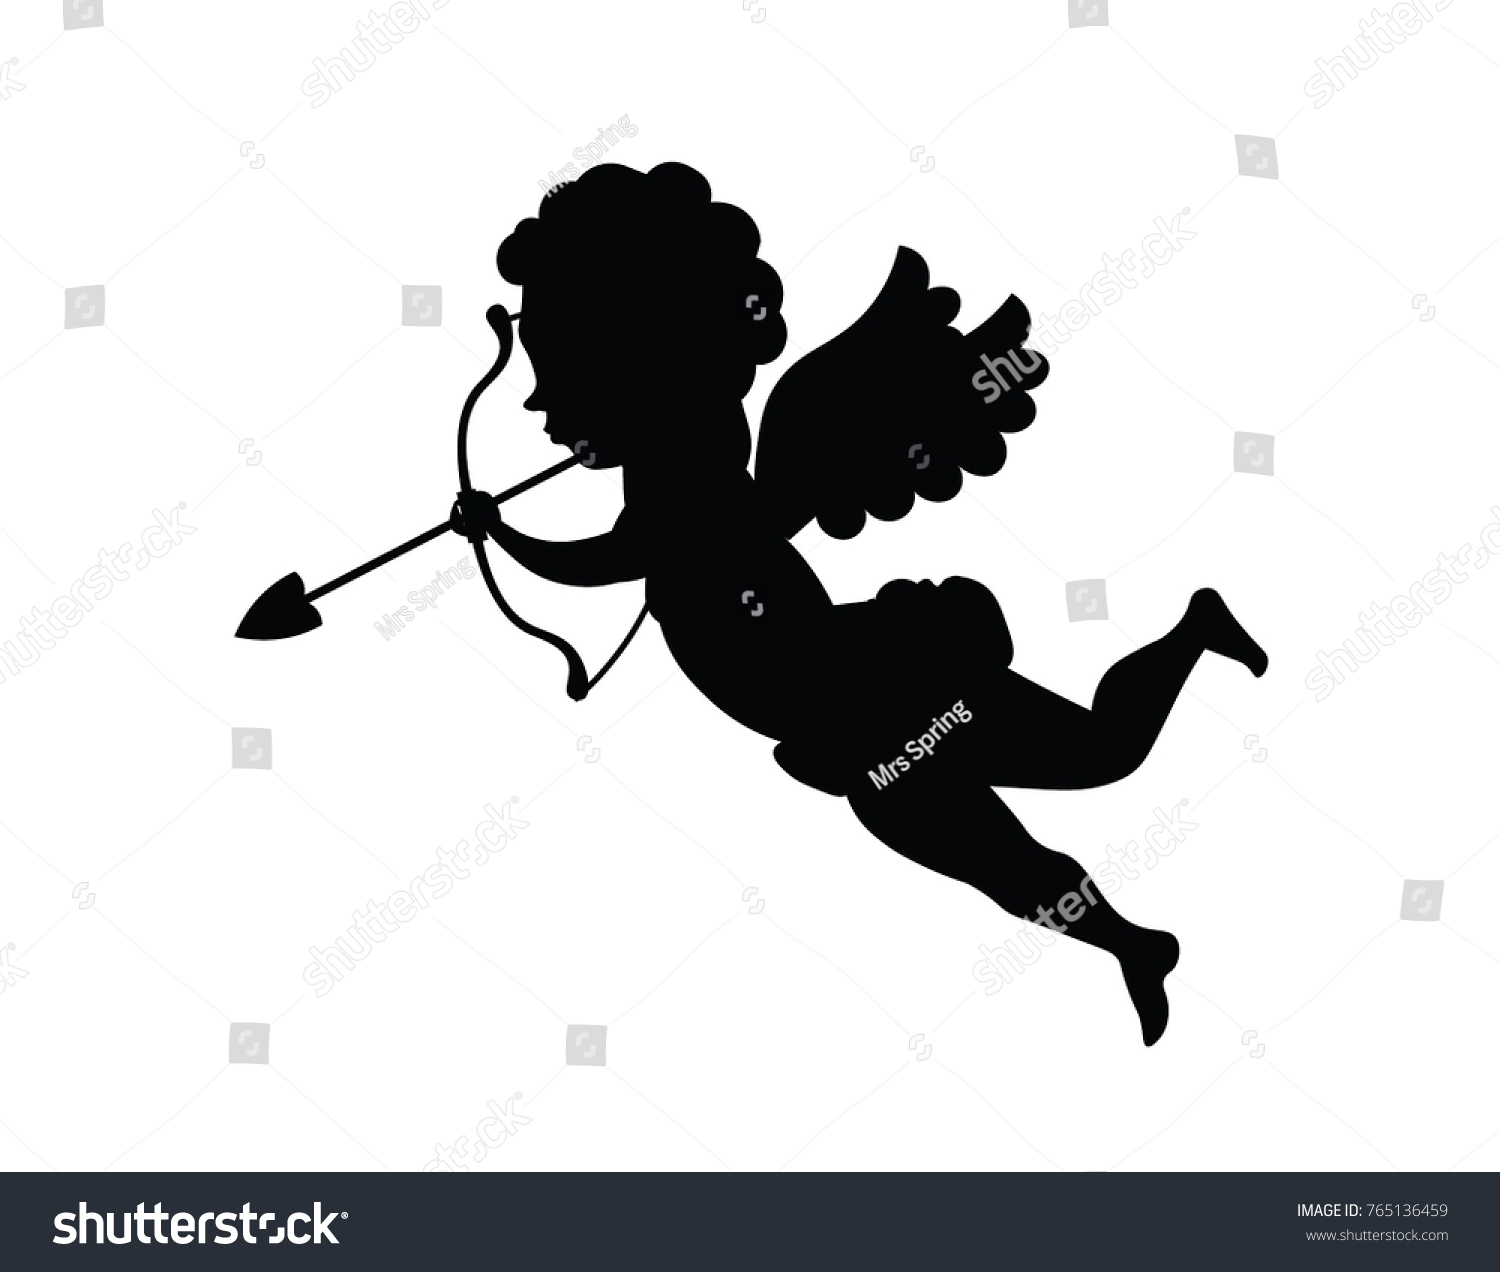 Cupid Boy Silhouette Stock Vector Royalty Free 765136459 Shutterstock 1623